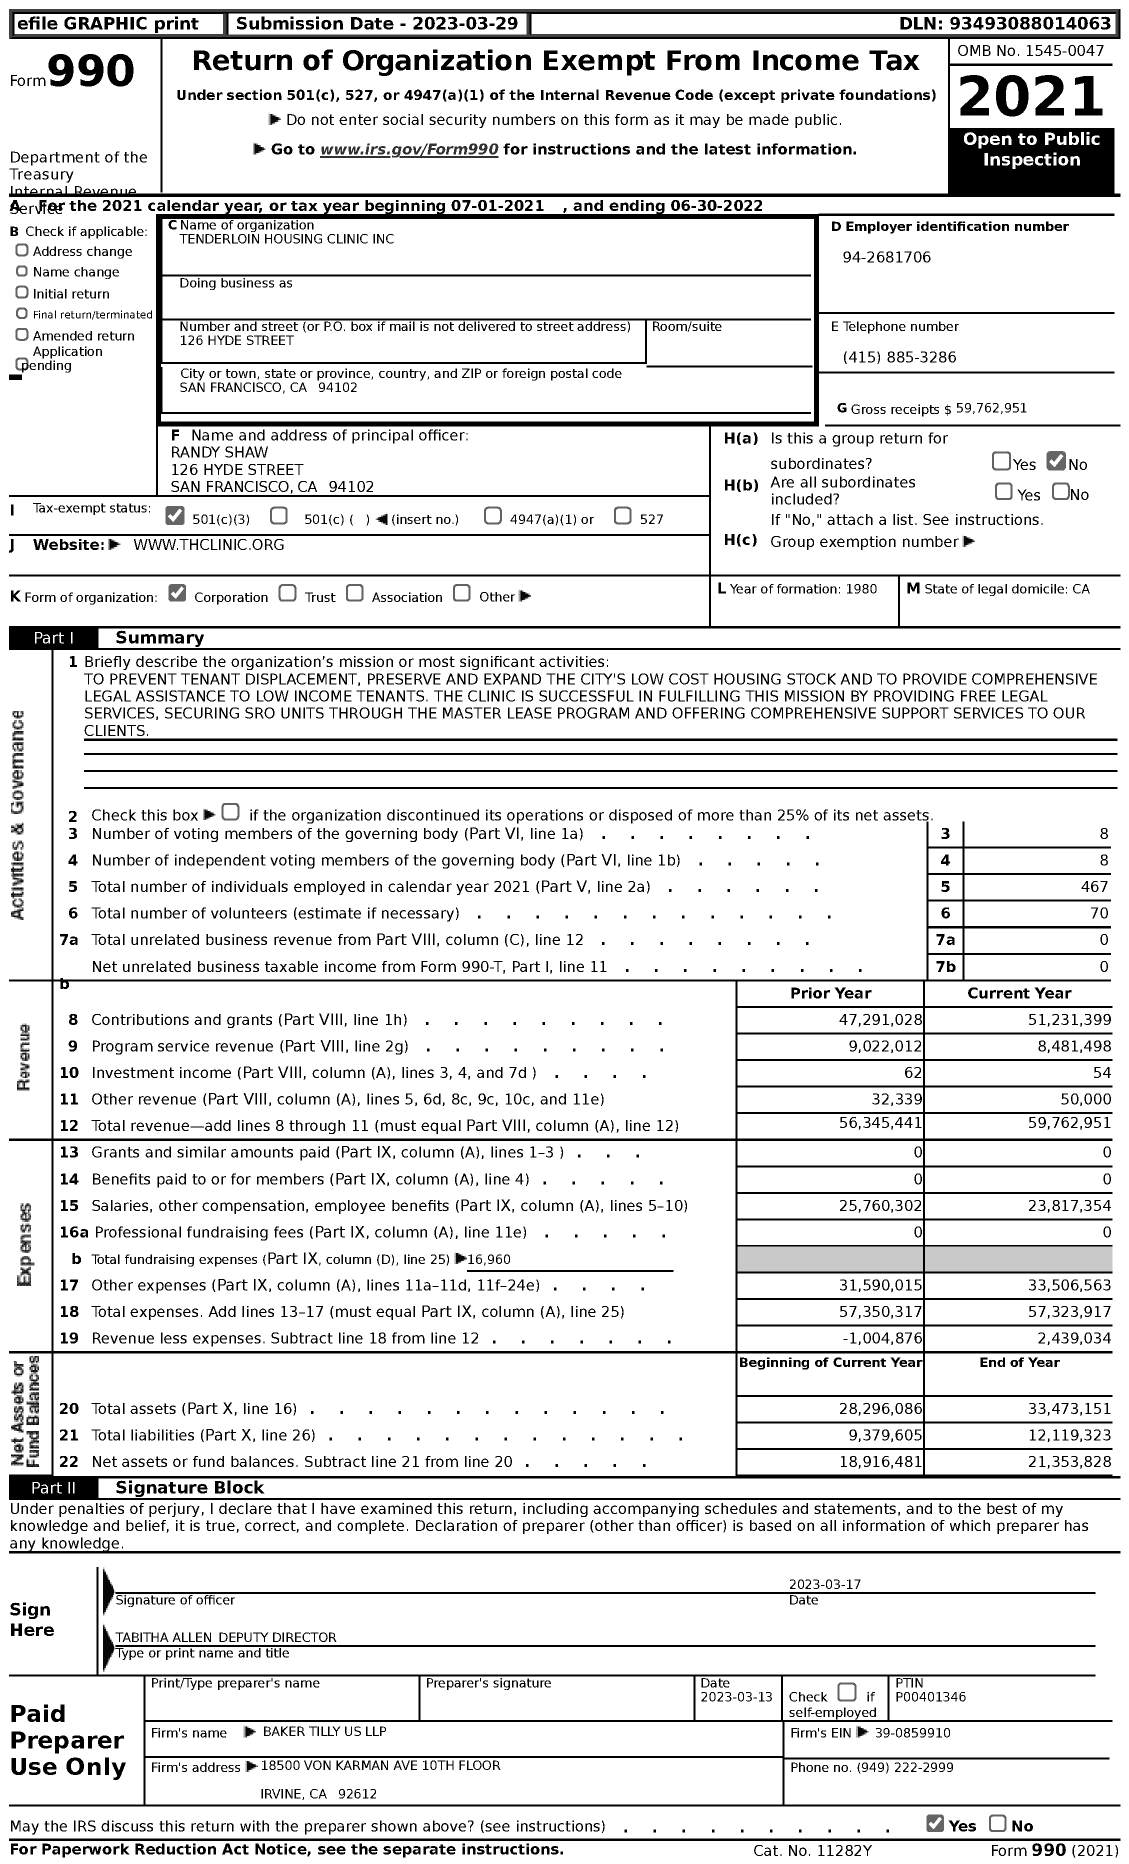 Image of first page of 2021 Form 990 for Tenderloin Housing Clinic (THC)